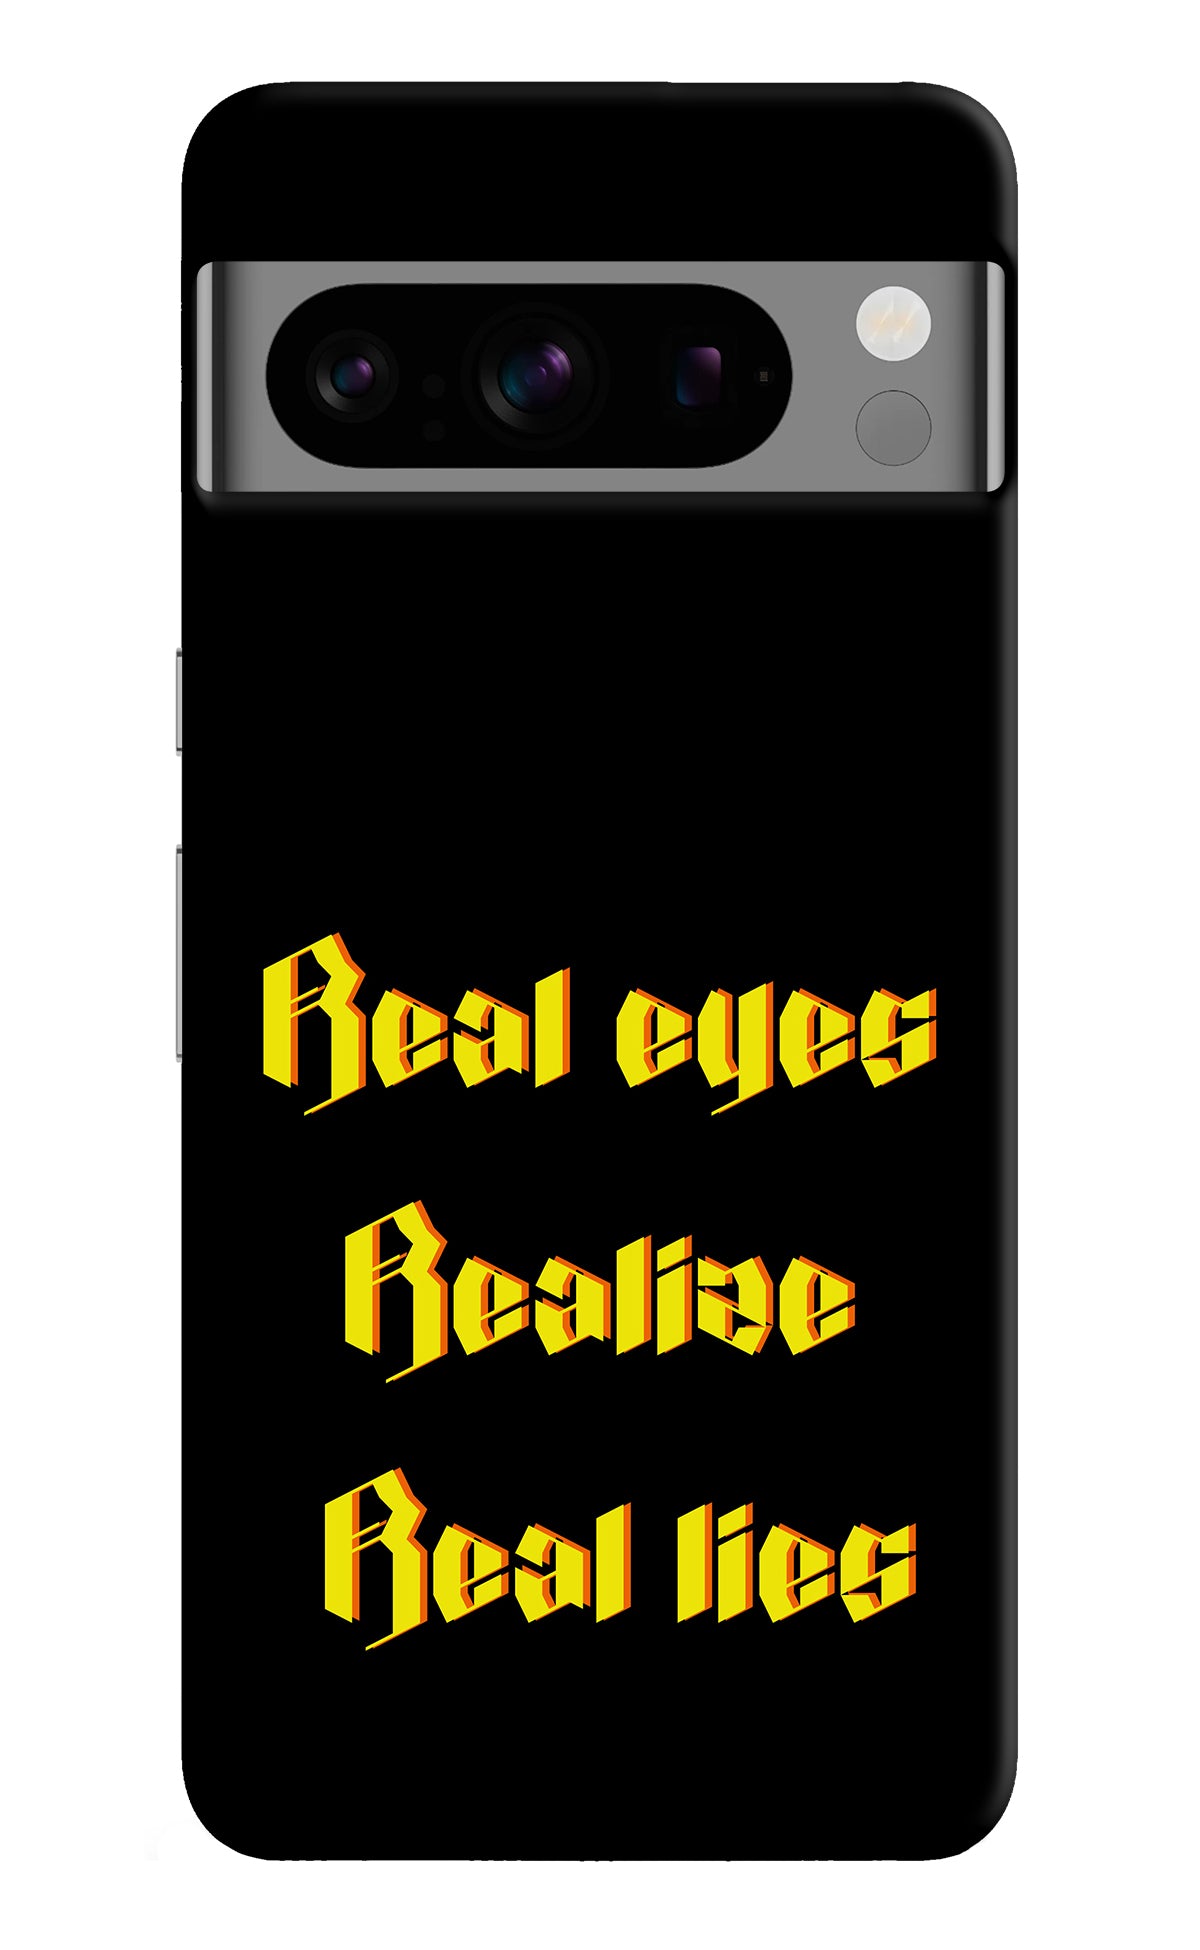 Real Eyes Realize Real Lies Google Pixel 8 Pro Back Cover